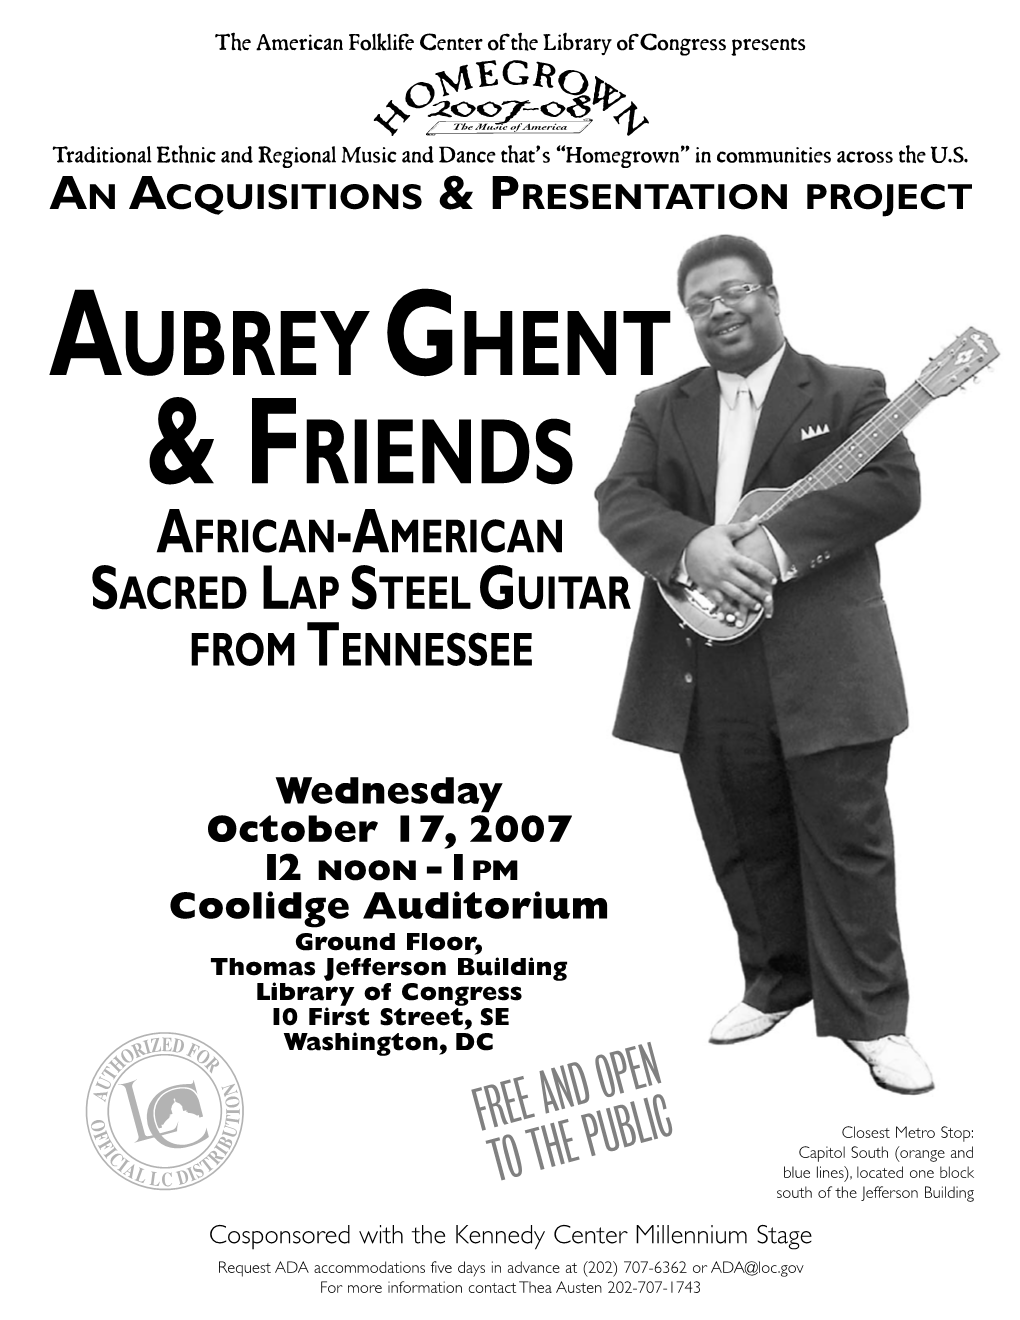 Aubrey Ghent & Friends African-American Sacred Lap Steel Guitar from Tennessee